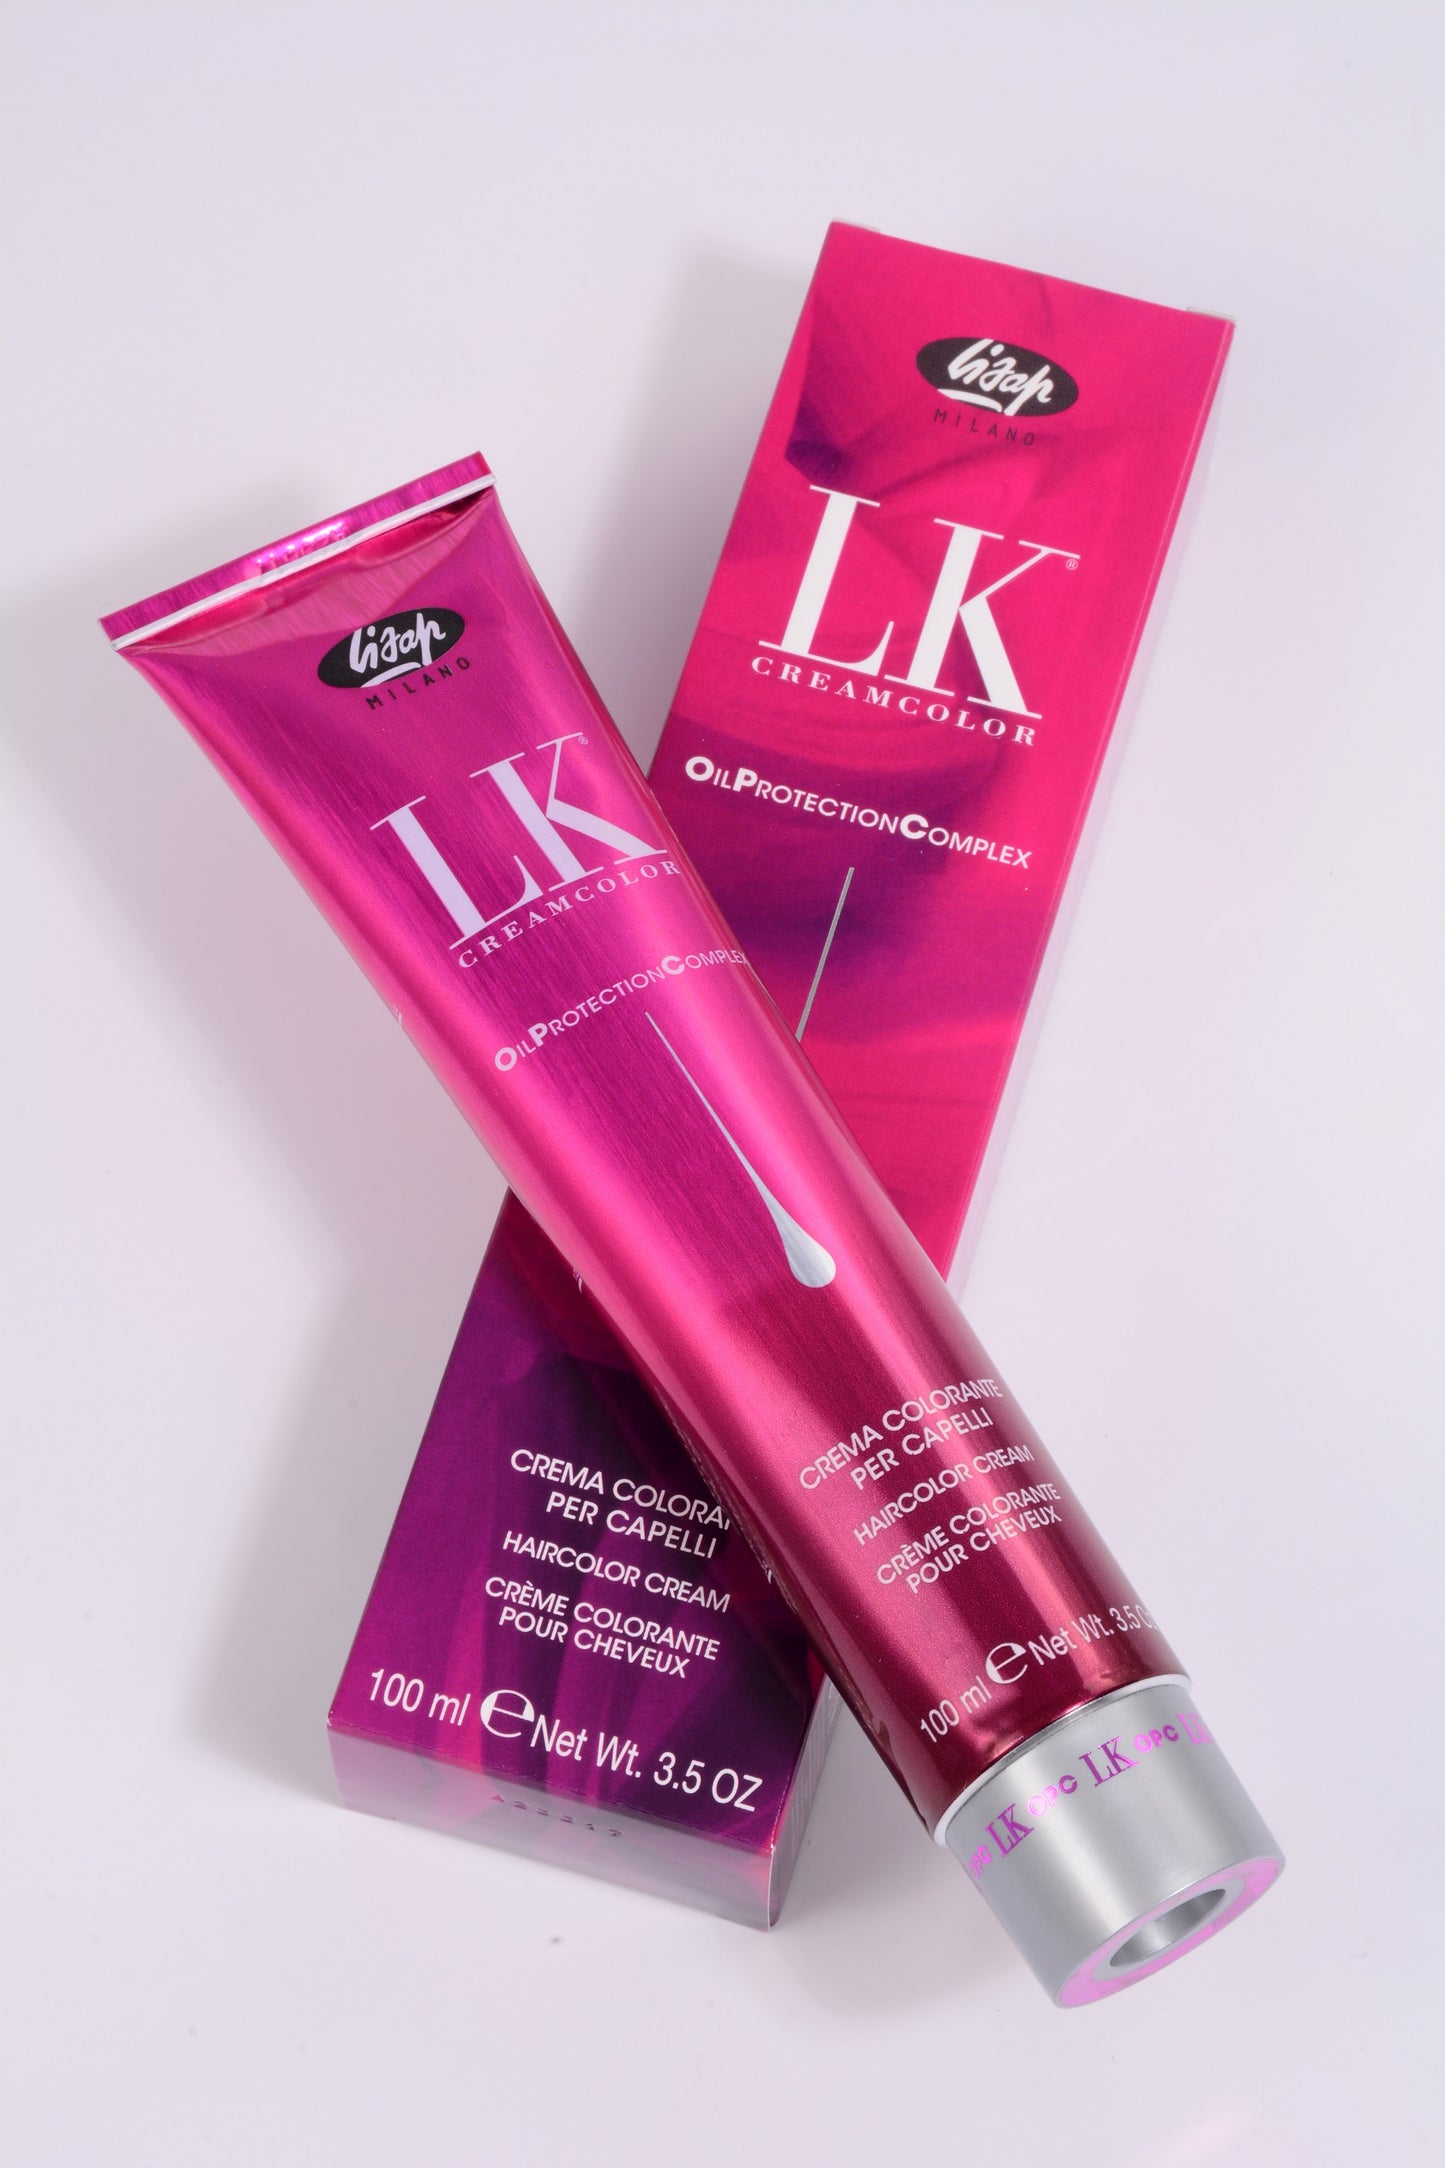 LK Creamcolor 9/78 Oil Protection Complex